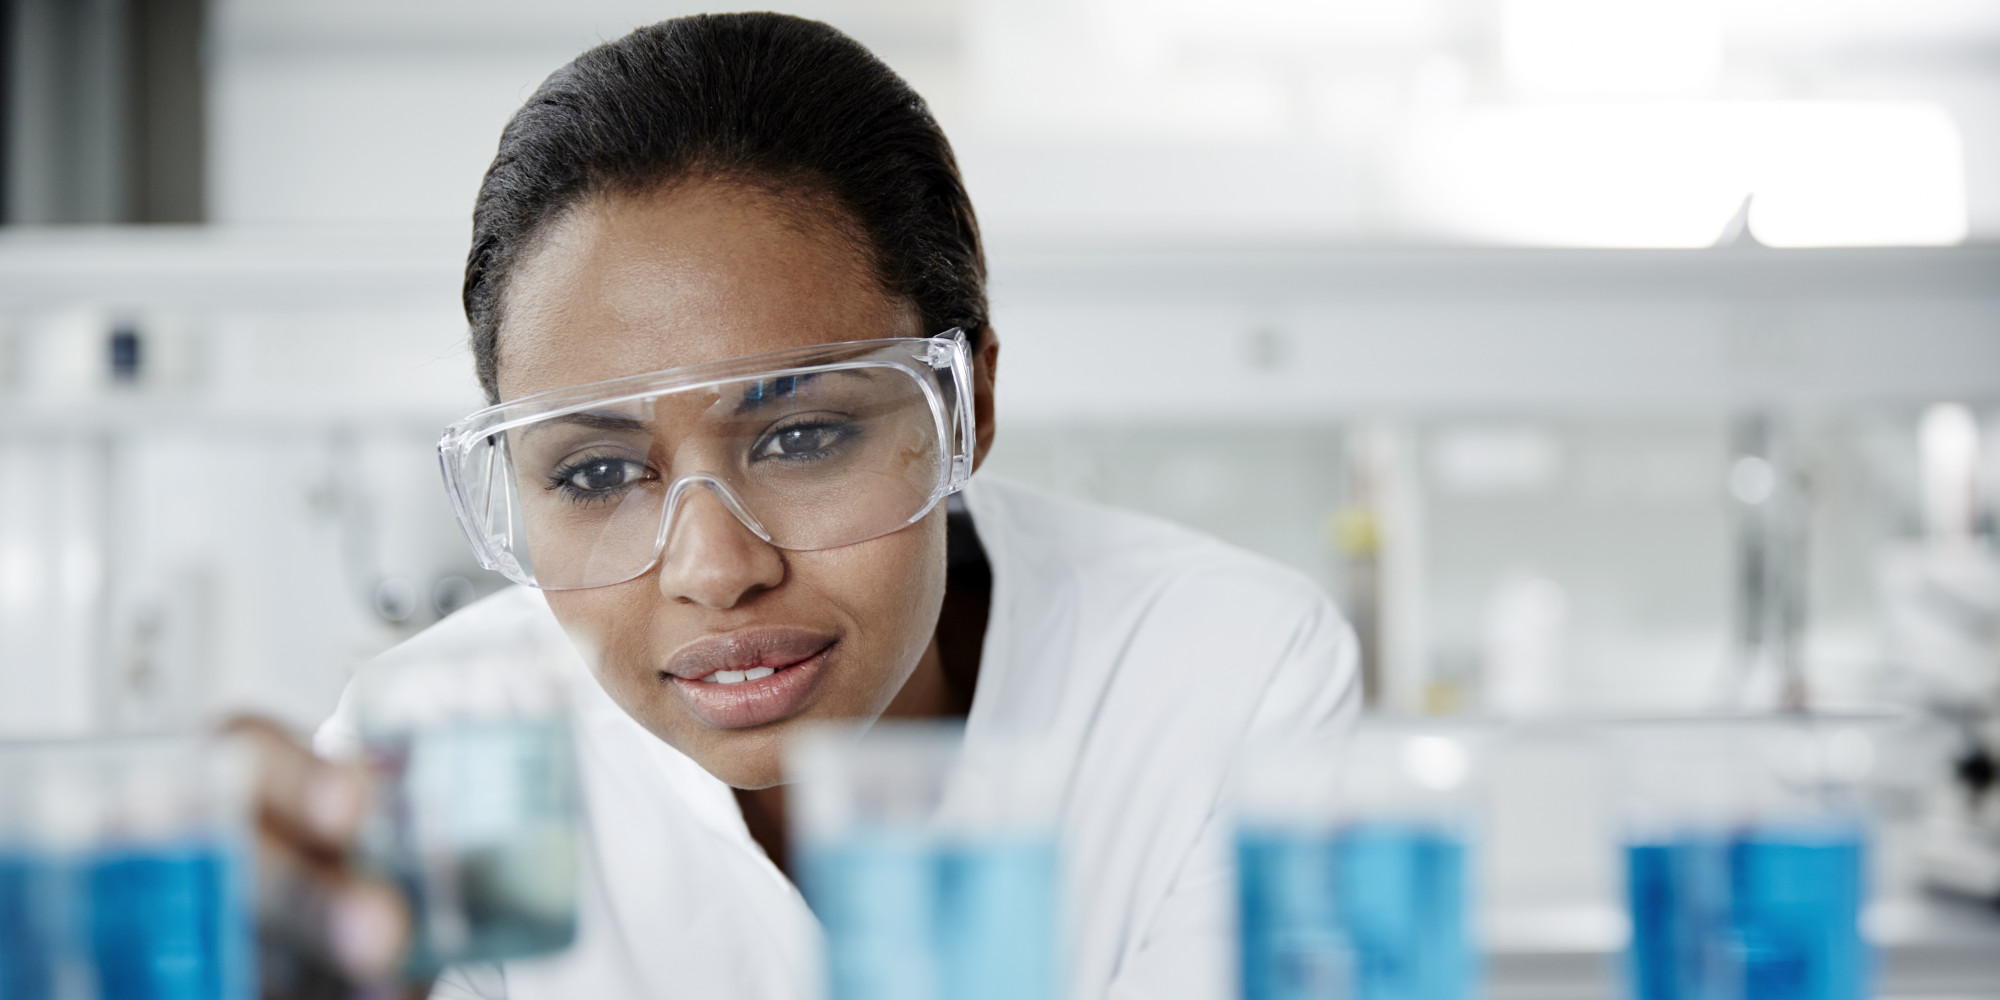 Black Women Defy Odds to Overcome Barriers in STEM Only to Be ...